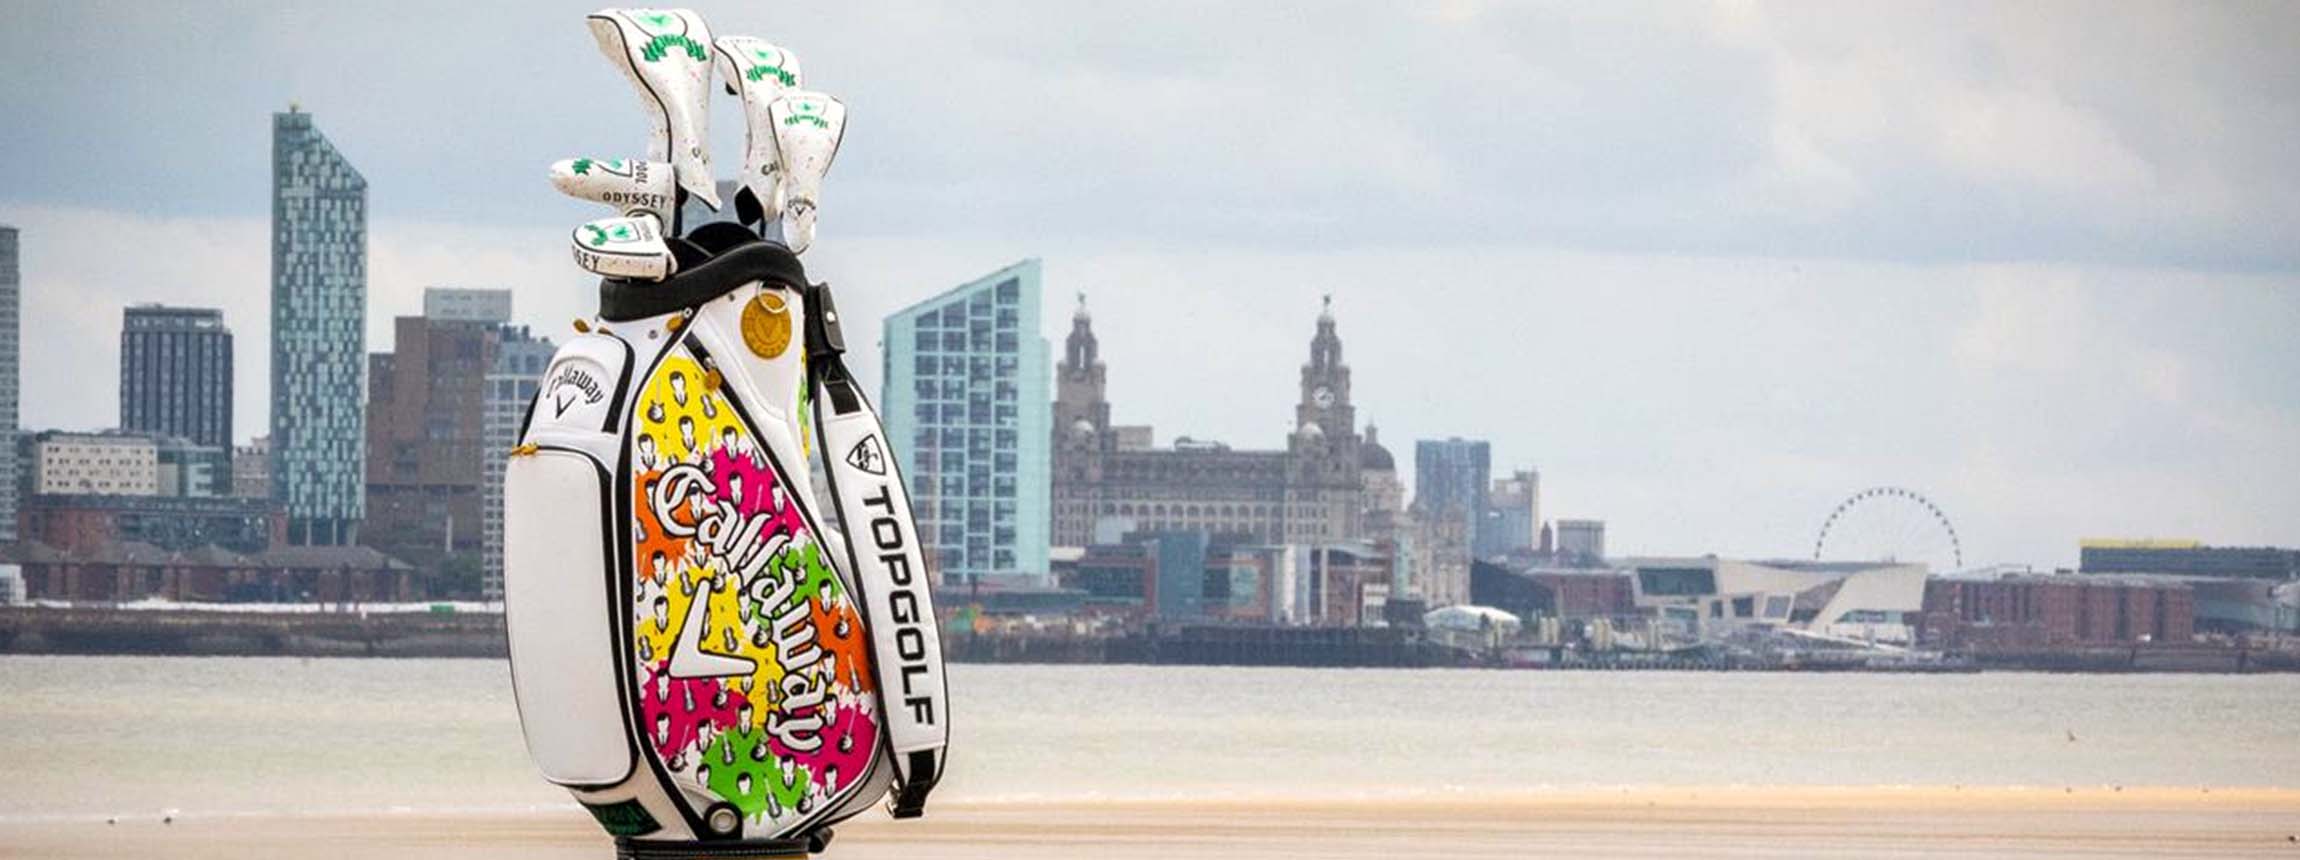 Callaway Golf Bag in front of the Liver Building